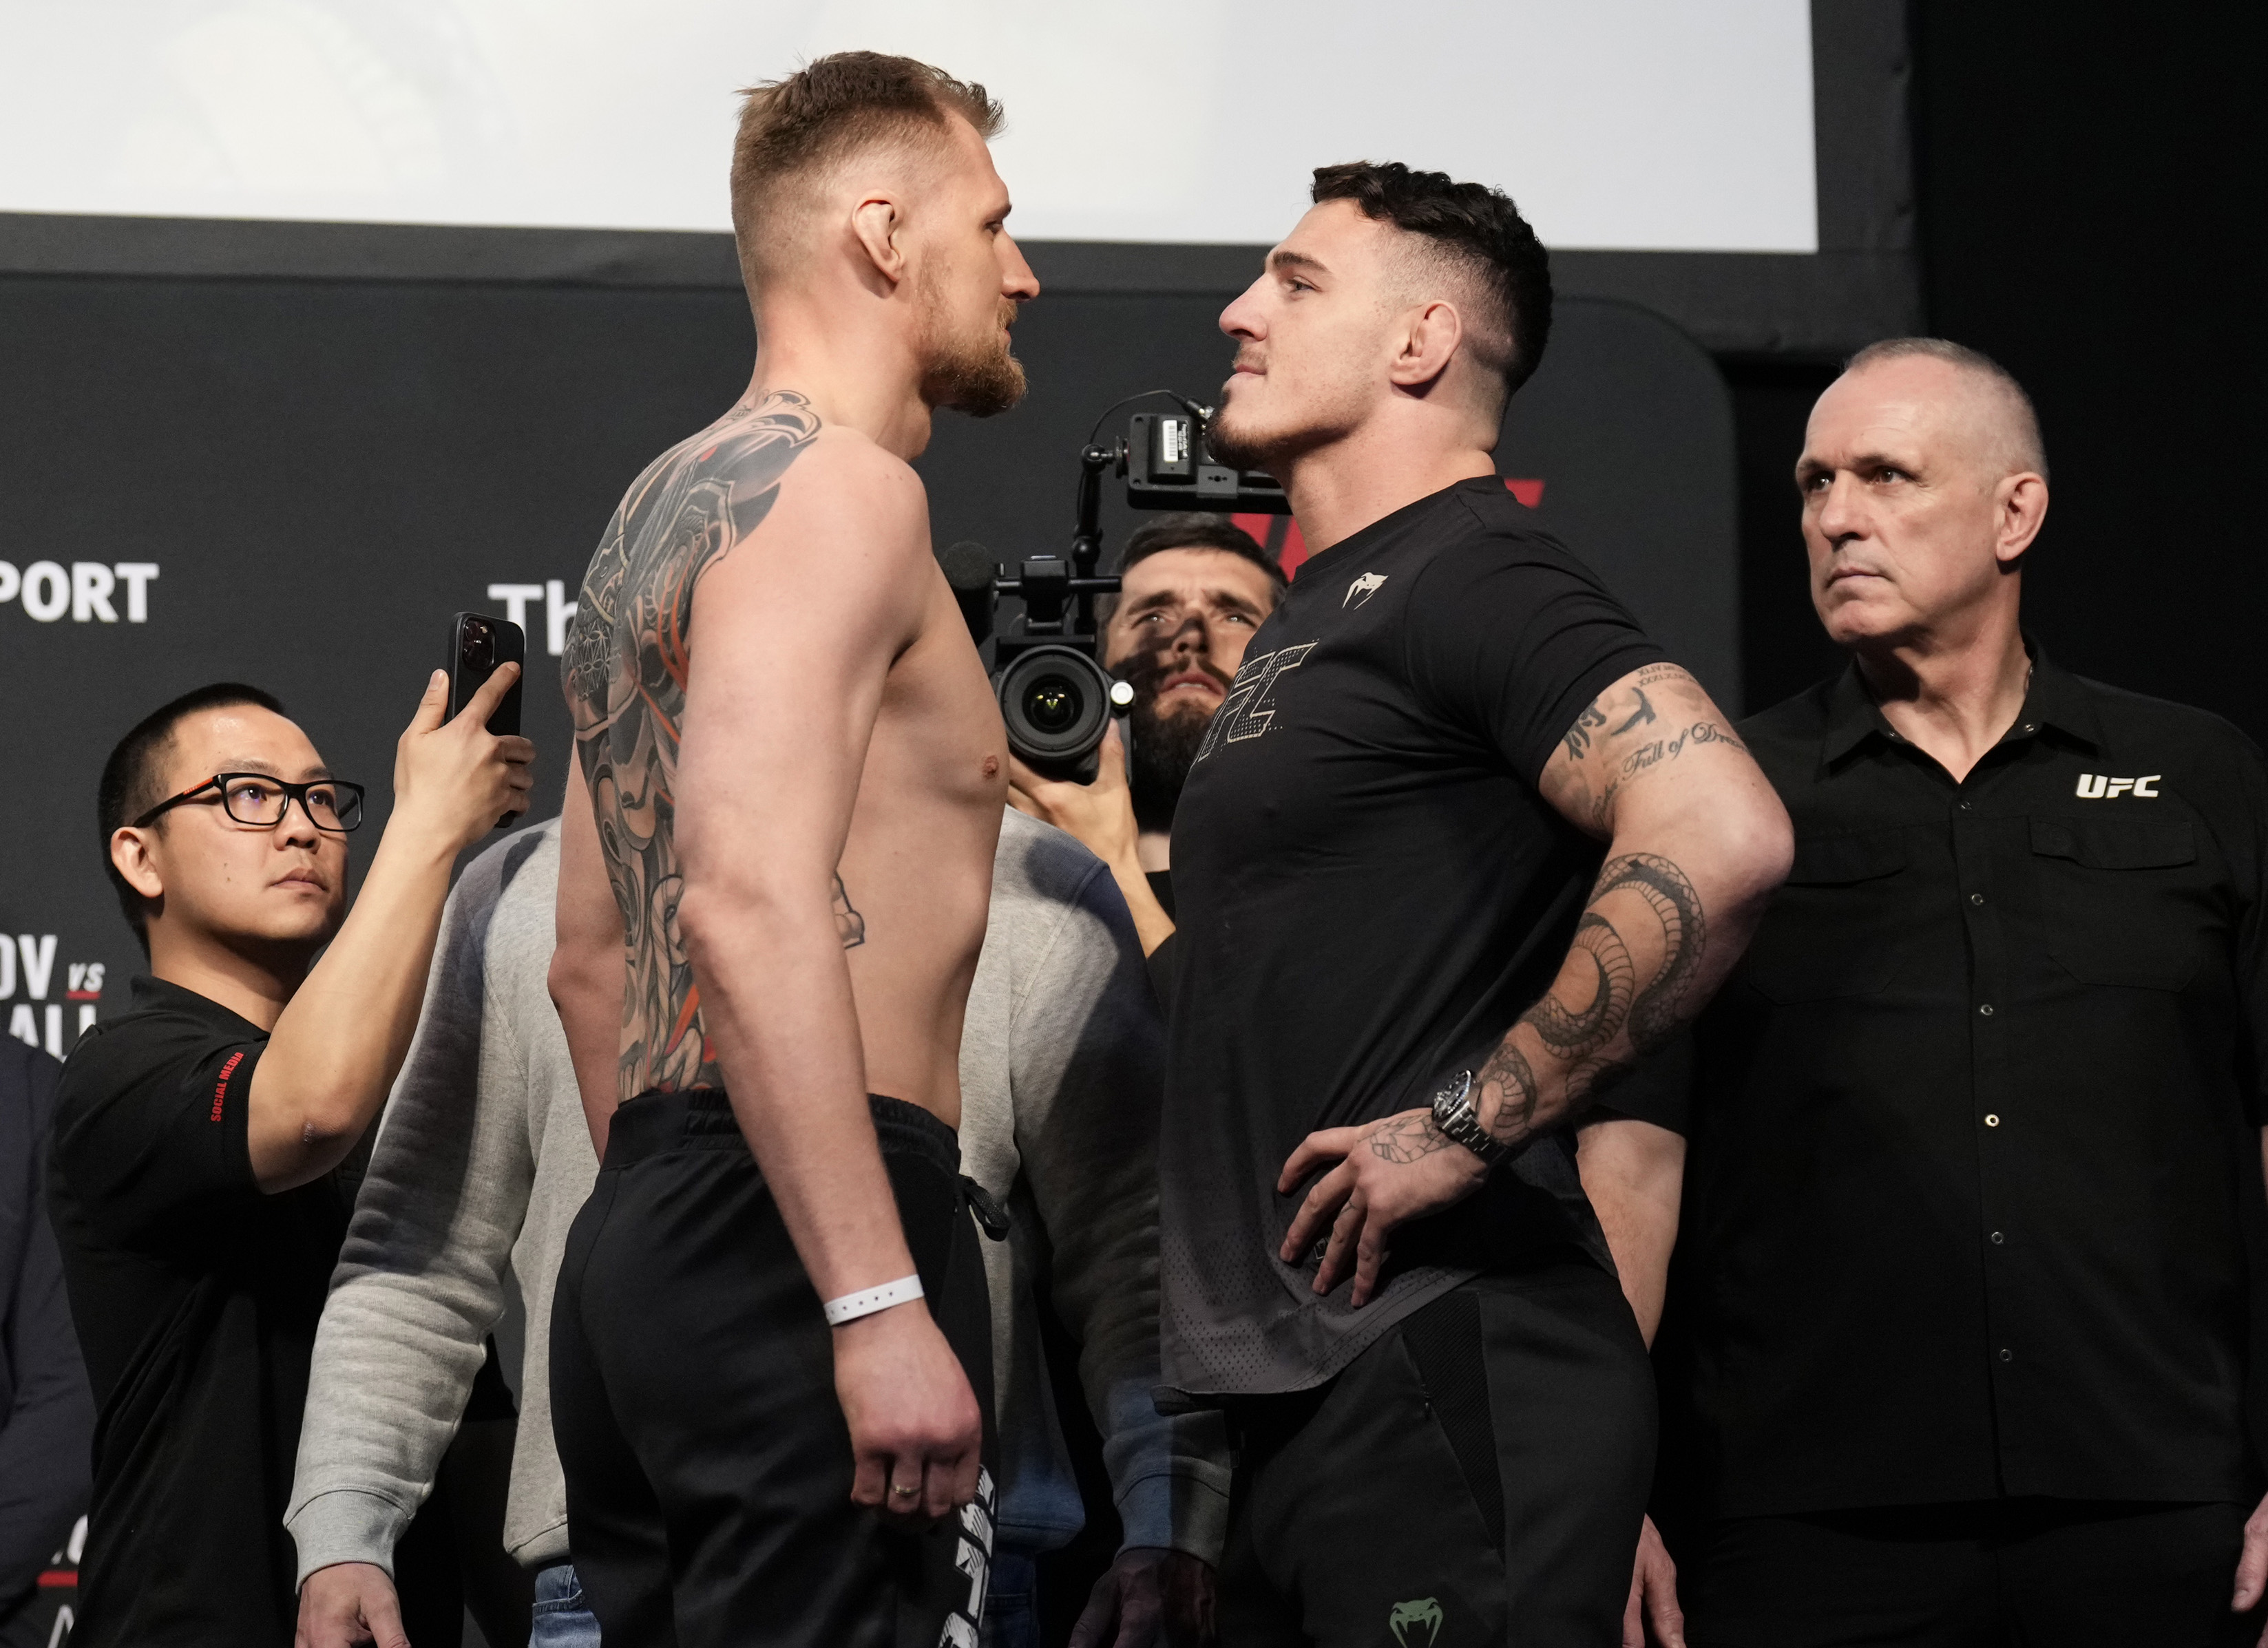 Tom Aspinall is favored over Alexander Volkov in the UFC London main event